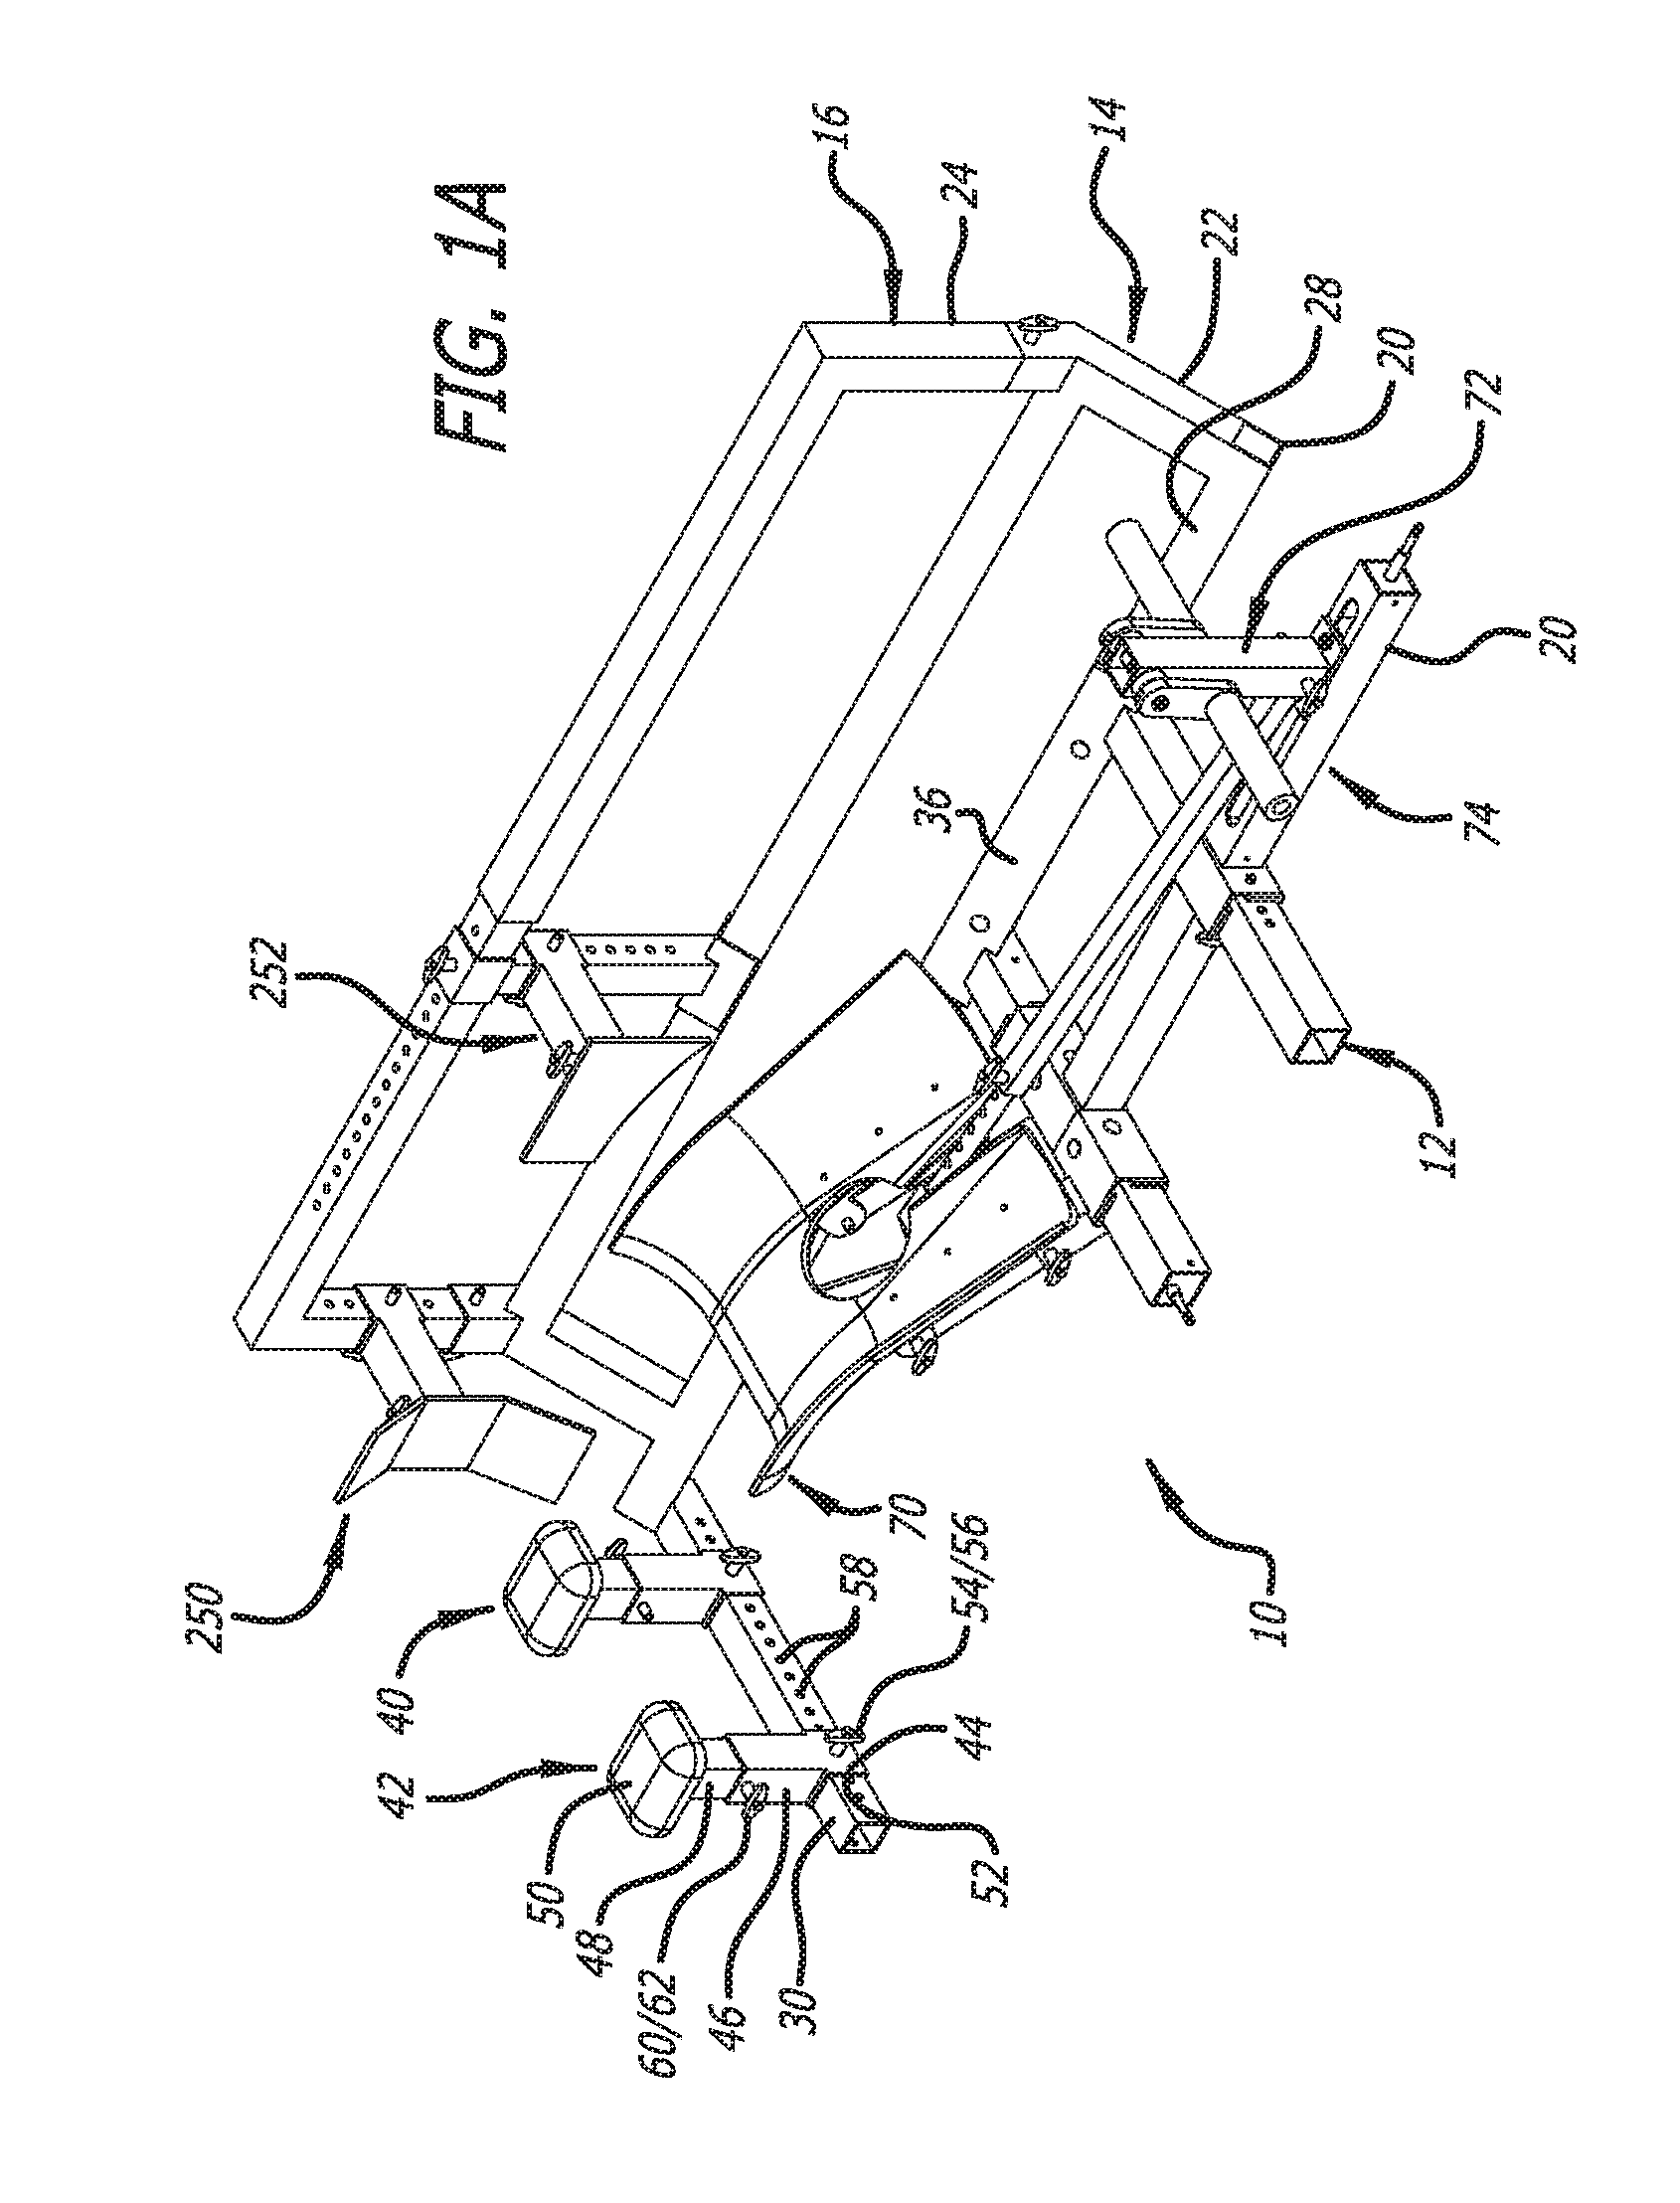 Surgical frame and method for use thereof facilitating articulatable support for a patient during surgery